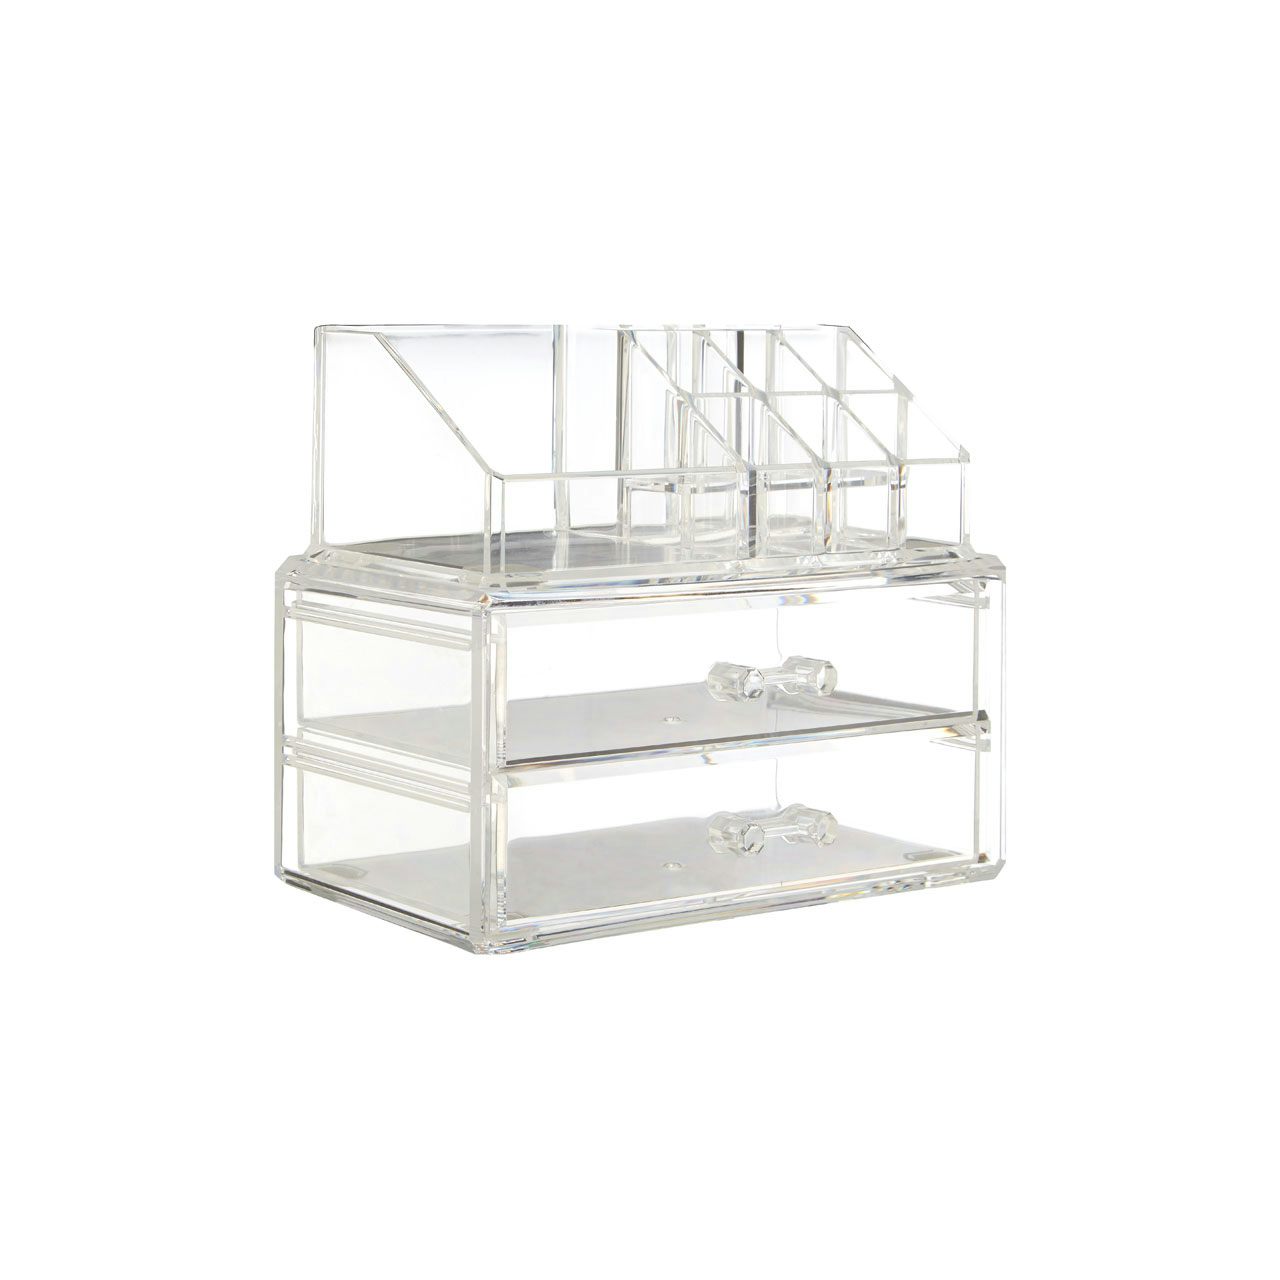 Accents Clear cosmetic organiser with 9 compartments and 2 drawers